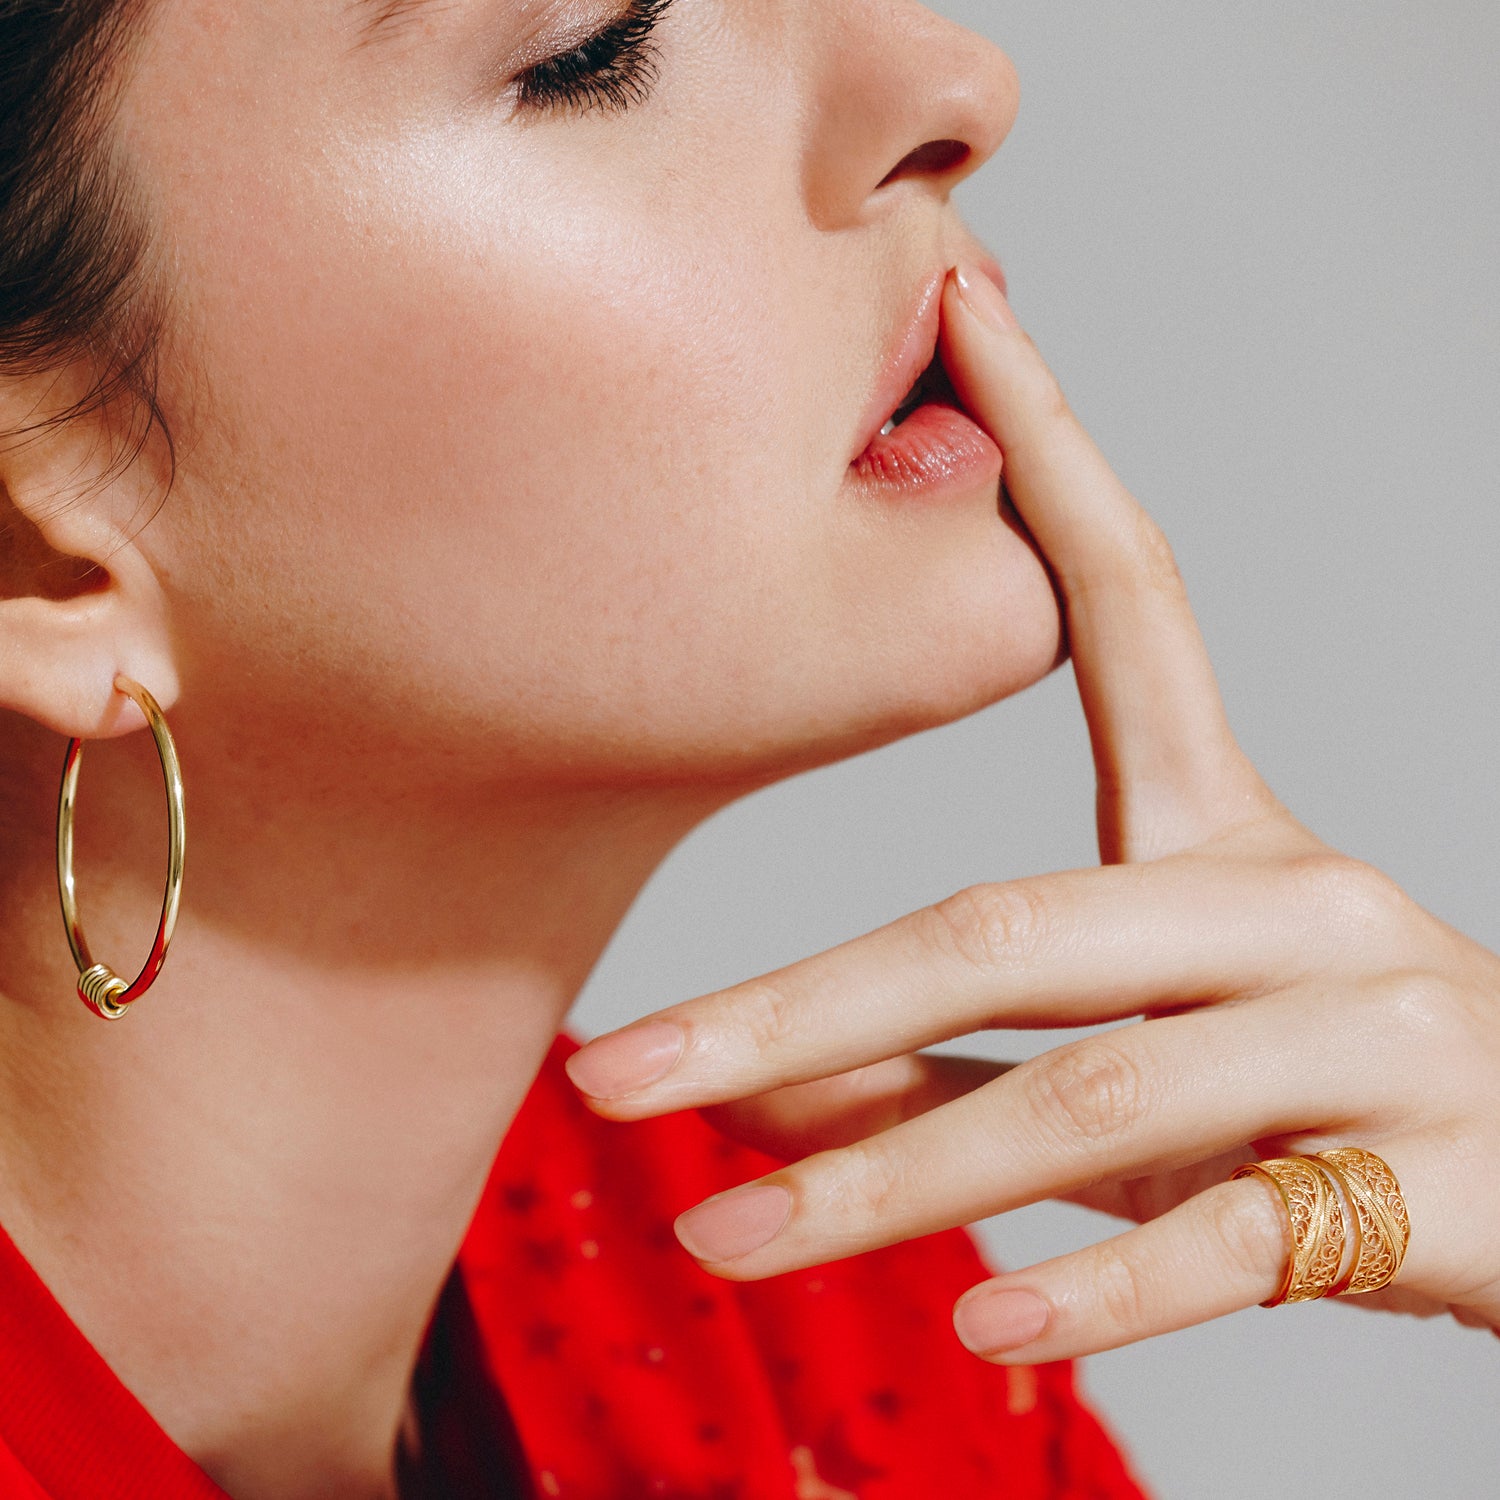 An auction for ethical jewellery. Arabel Lebrusan raises funds for Pure Earth